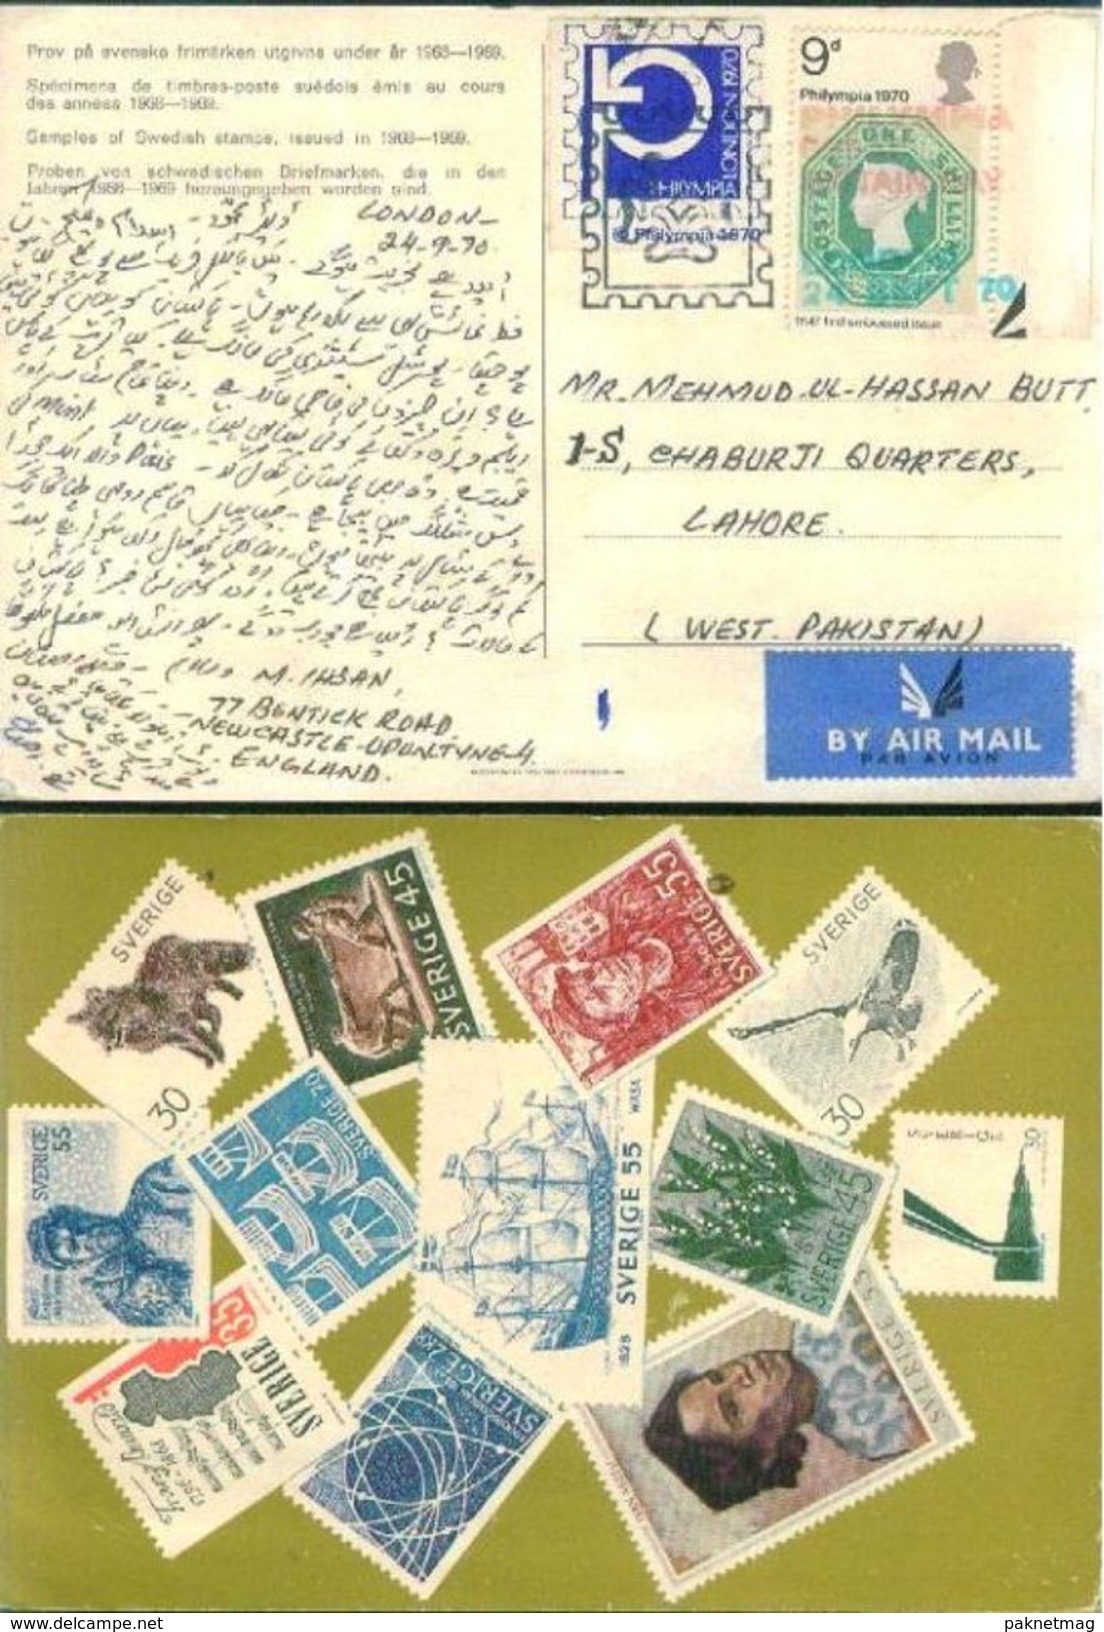 G99- Used Post Card. Samples Of Swedish Stamps, Issued In 1968-1969. - Nigeria (1961-...)